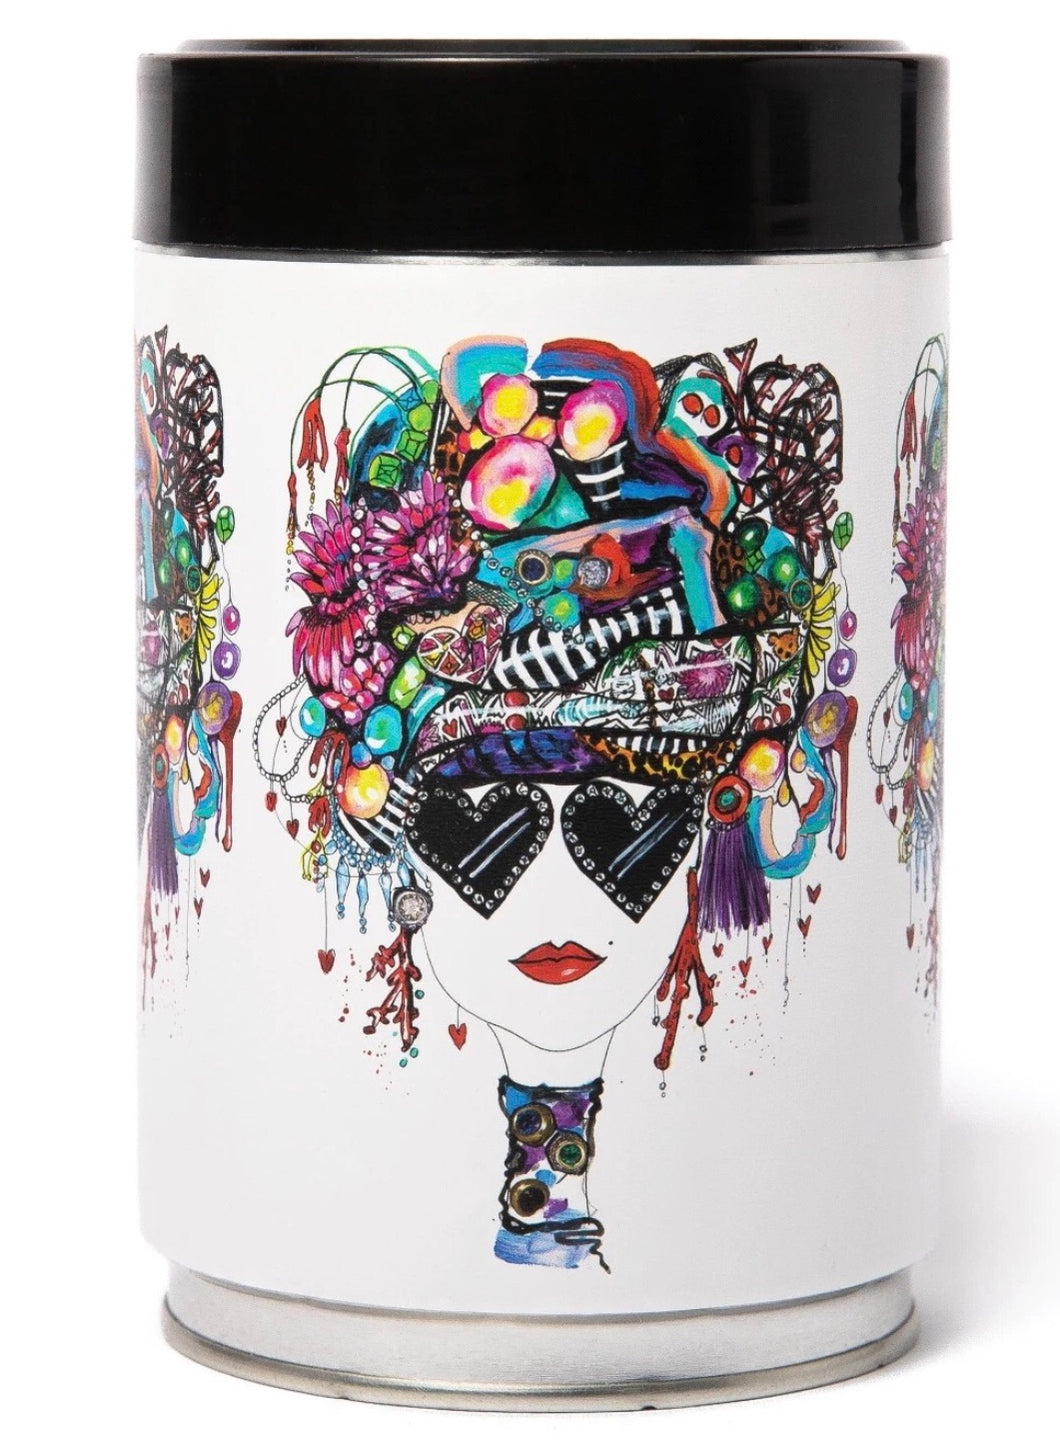 LIMITED EDITION COFFEE TIN - I'M IN THE MOOD  £15.00